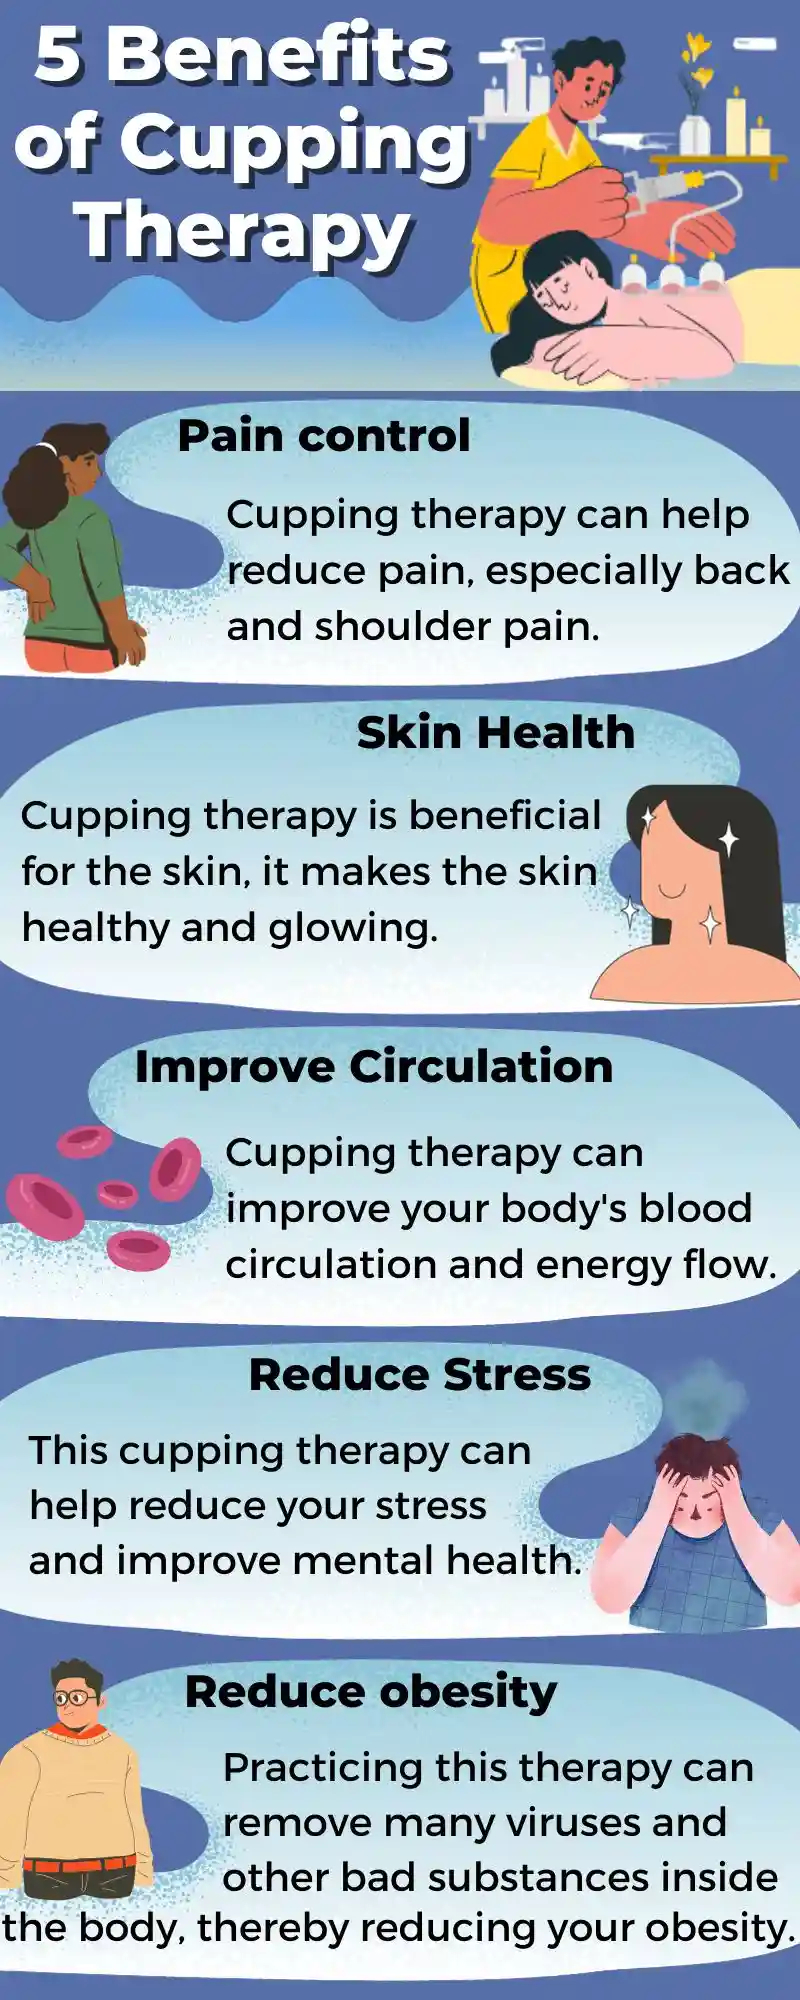 5 Benefits of Cupping Therapy